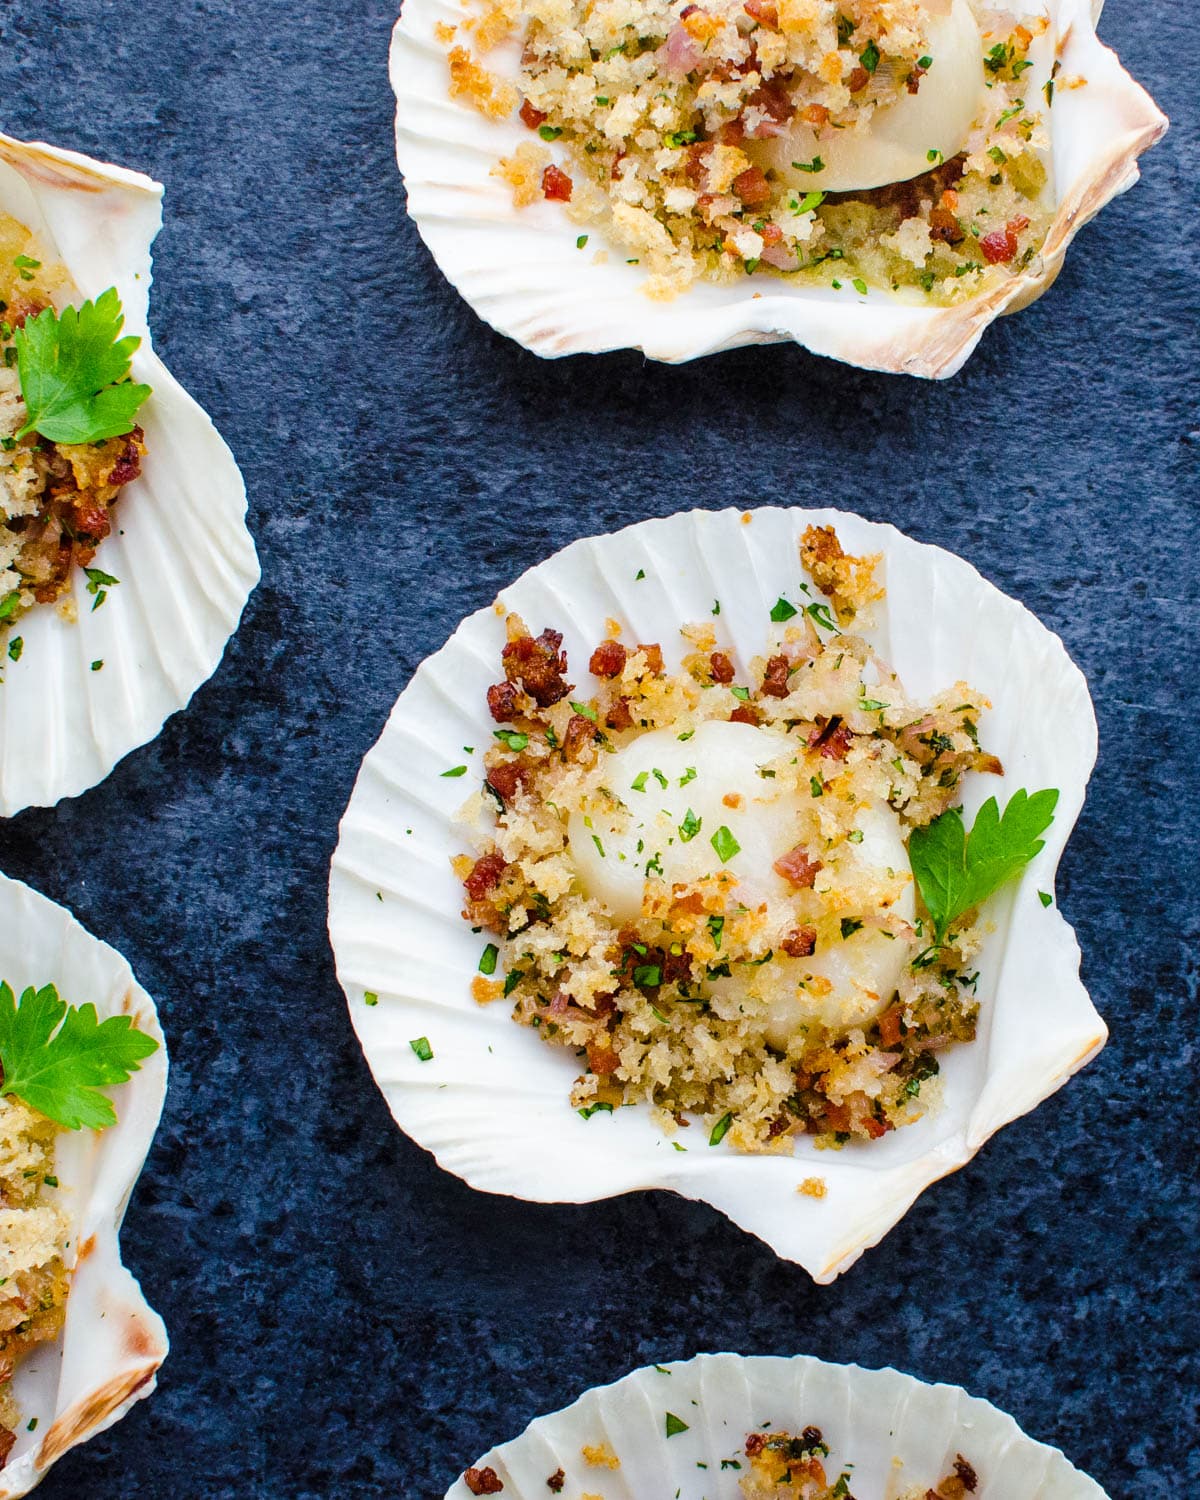 A display of baked sea scallops in their shells.